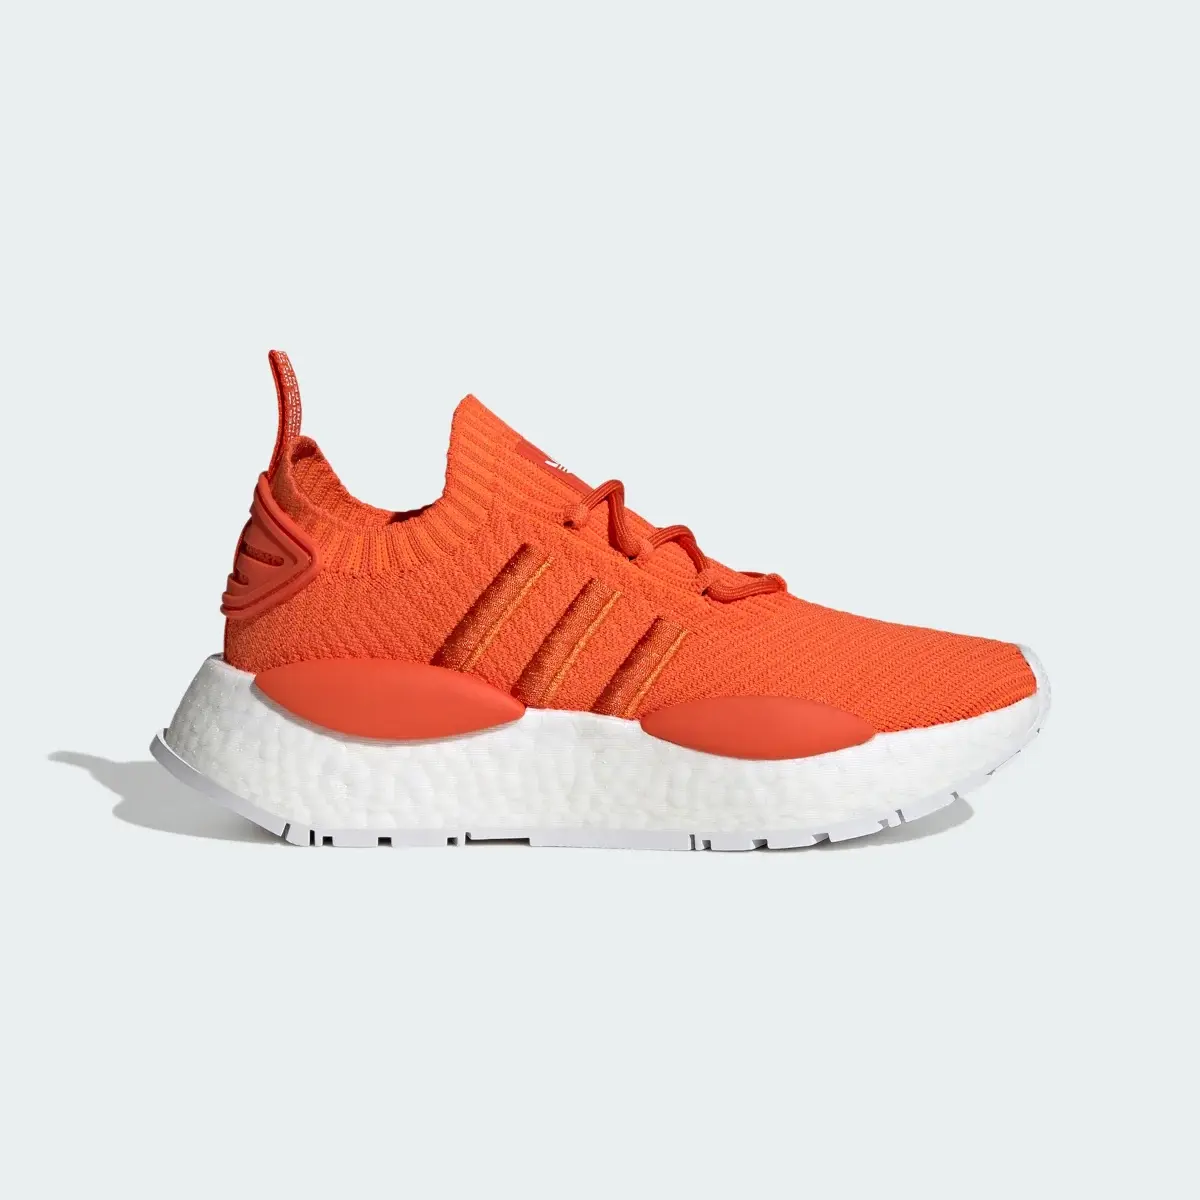 Adidas NMD_W1 Shoes. 2